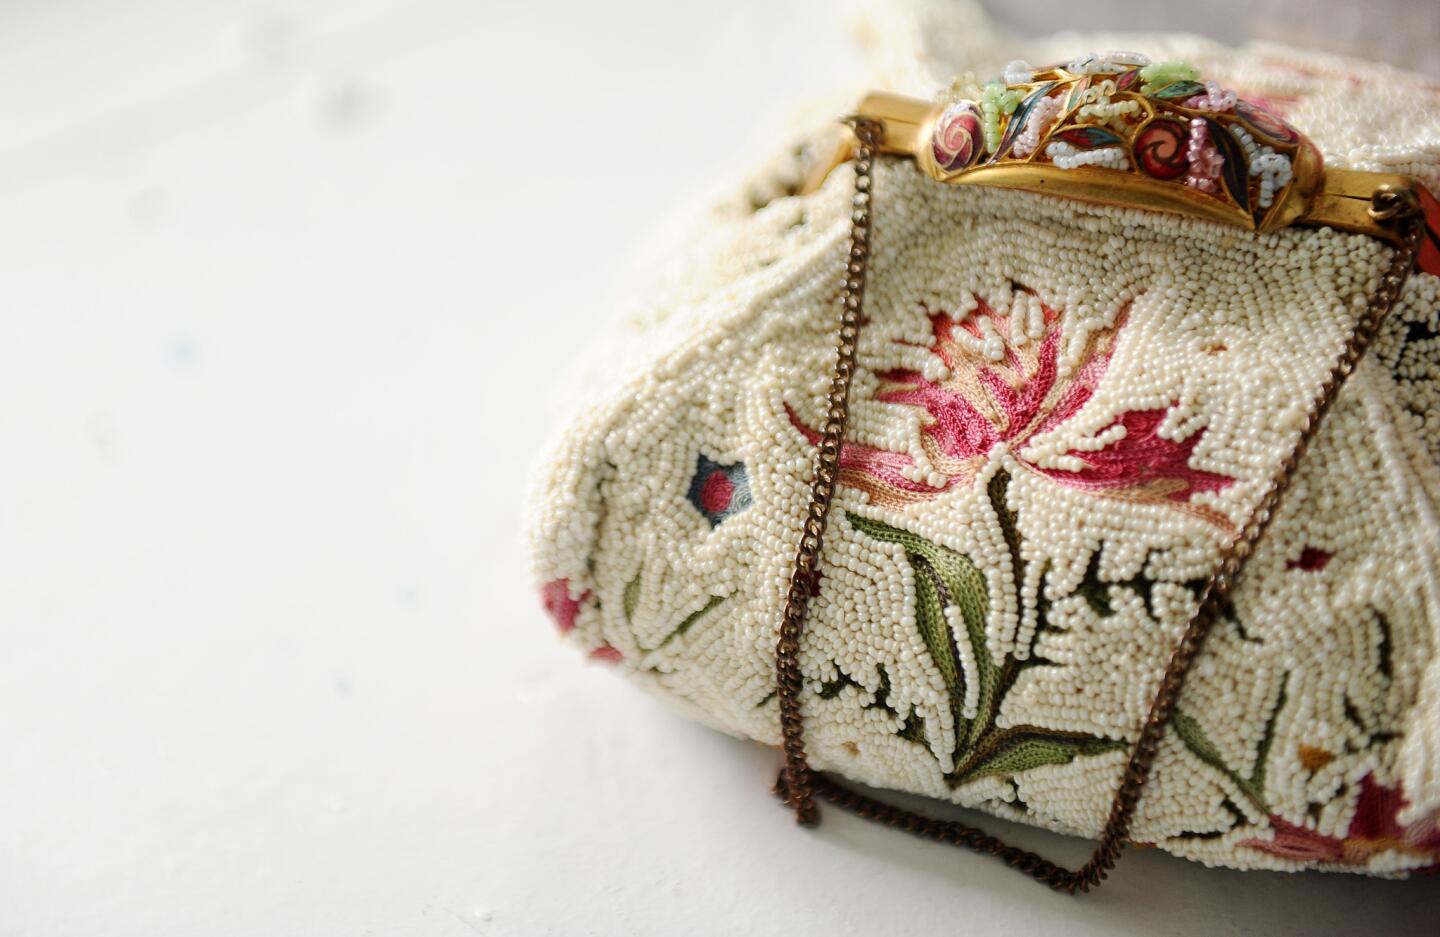 The Ebell of Los Angeles has an archive of clothing and accessories that dates back to the 1800s and includes about 900 pieces. This purse was featured in a vintage fashion show.